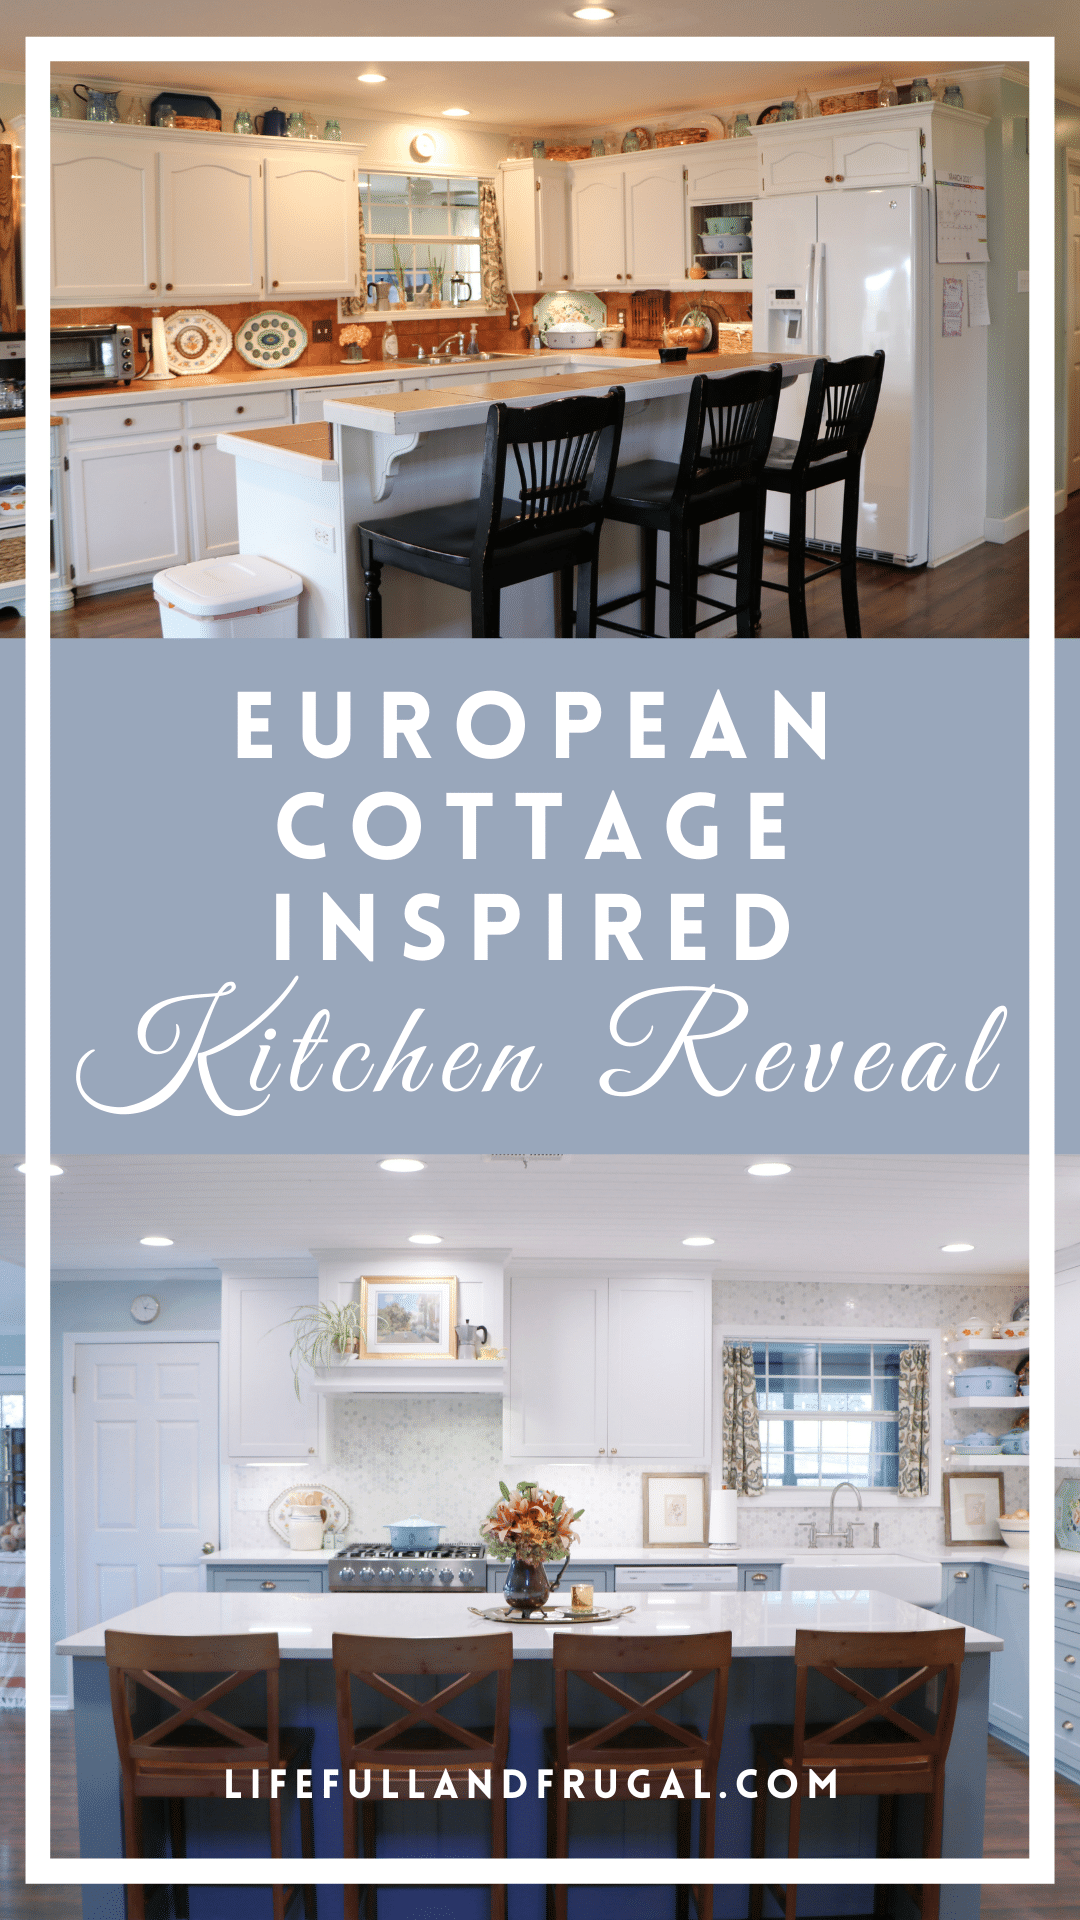 European Cottage Inspired Kitchen - Life Full and Frugal - dark red tiled kitchen on top, light bright blue and white kitchen on bottom